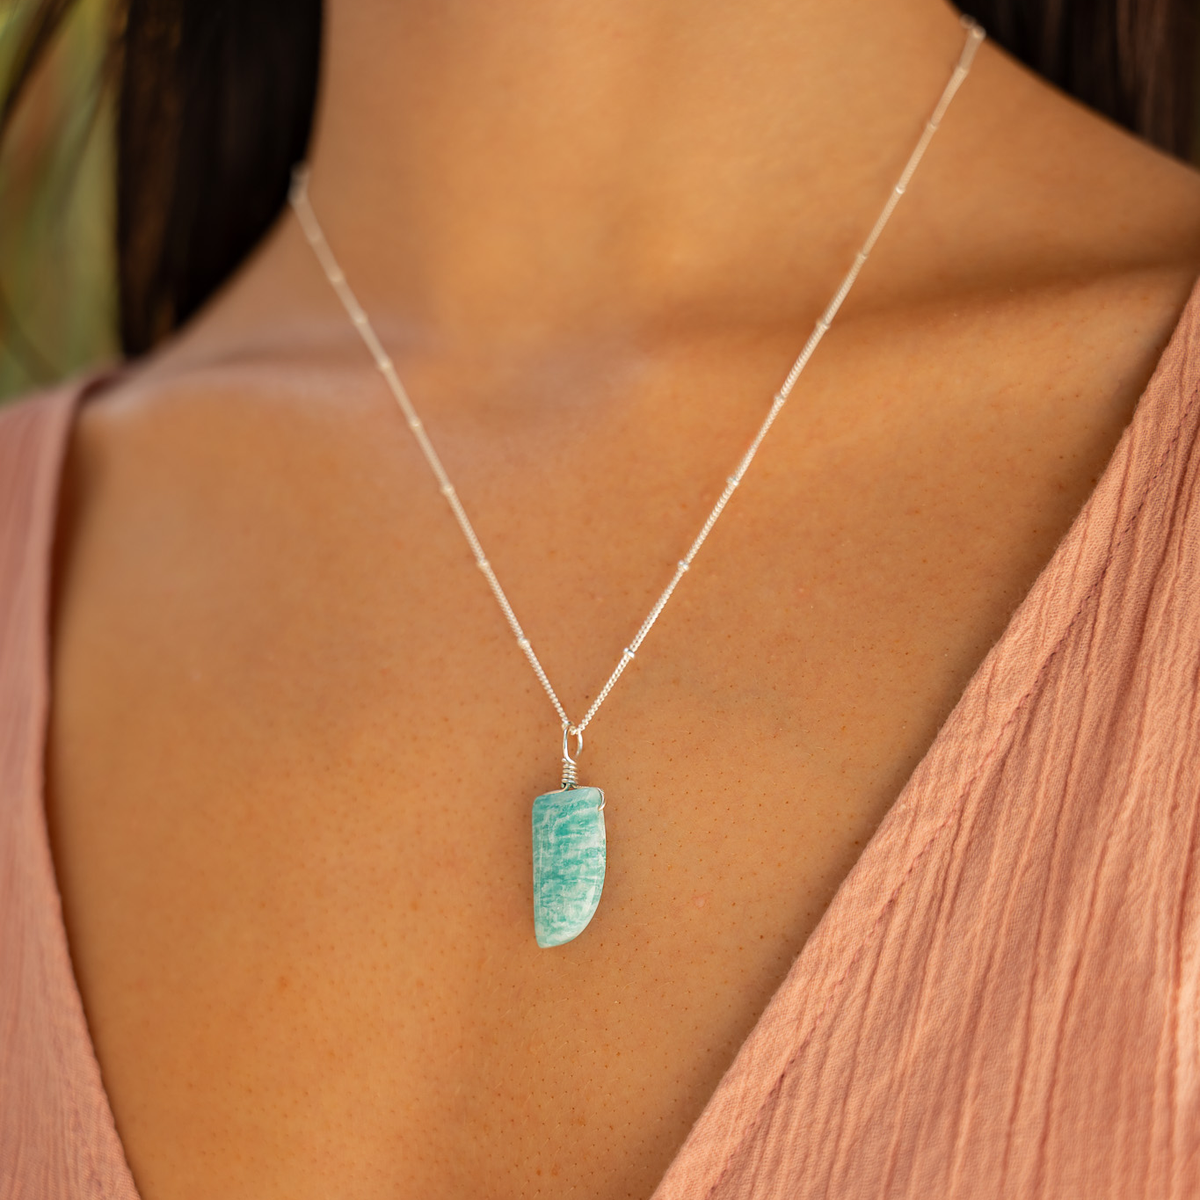 Small Smooth Amazonite Gentle Point Crystal Pendant Necklace